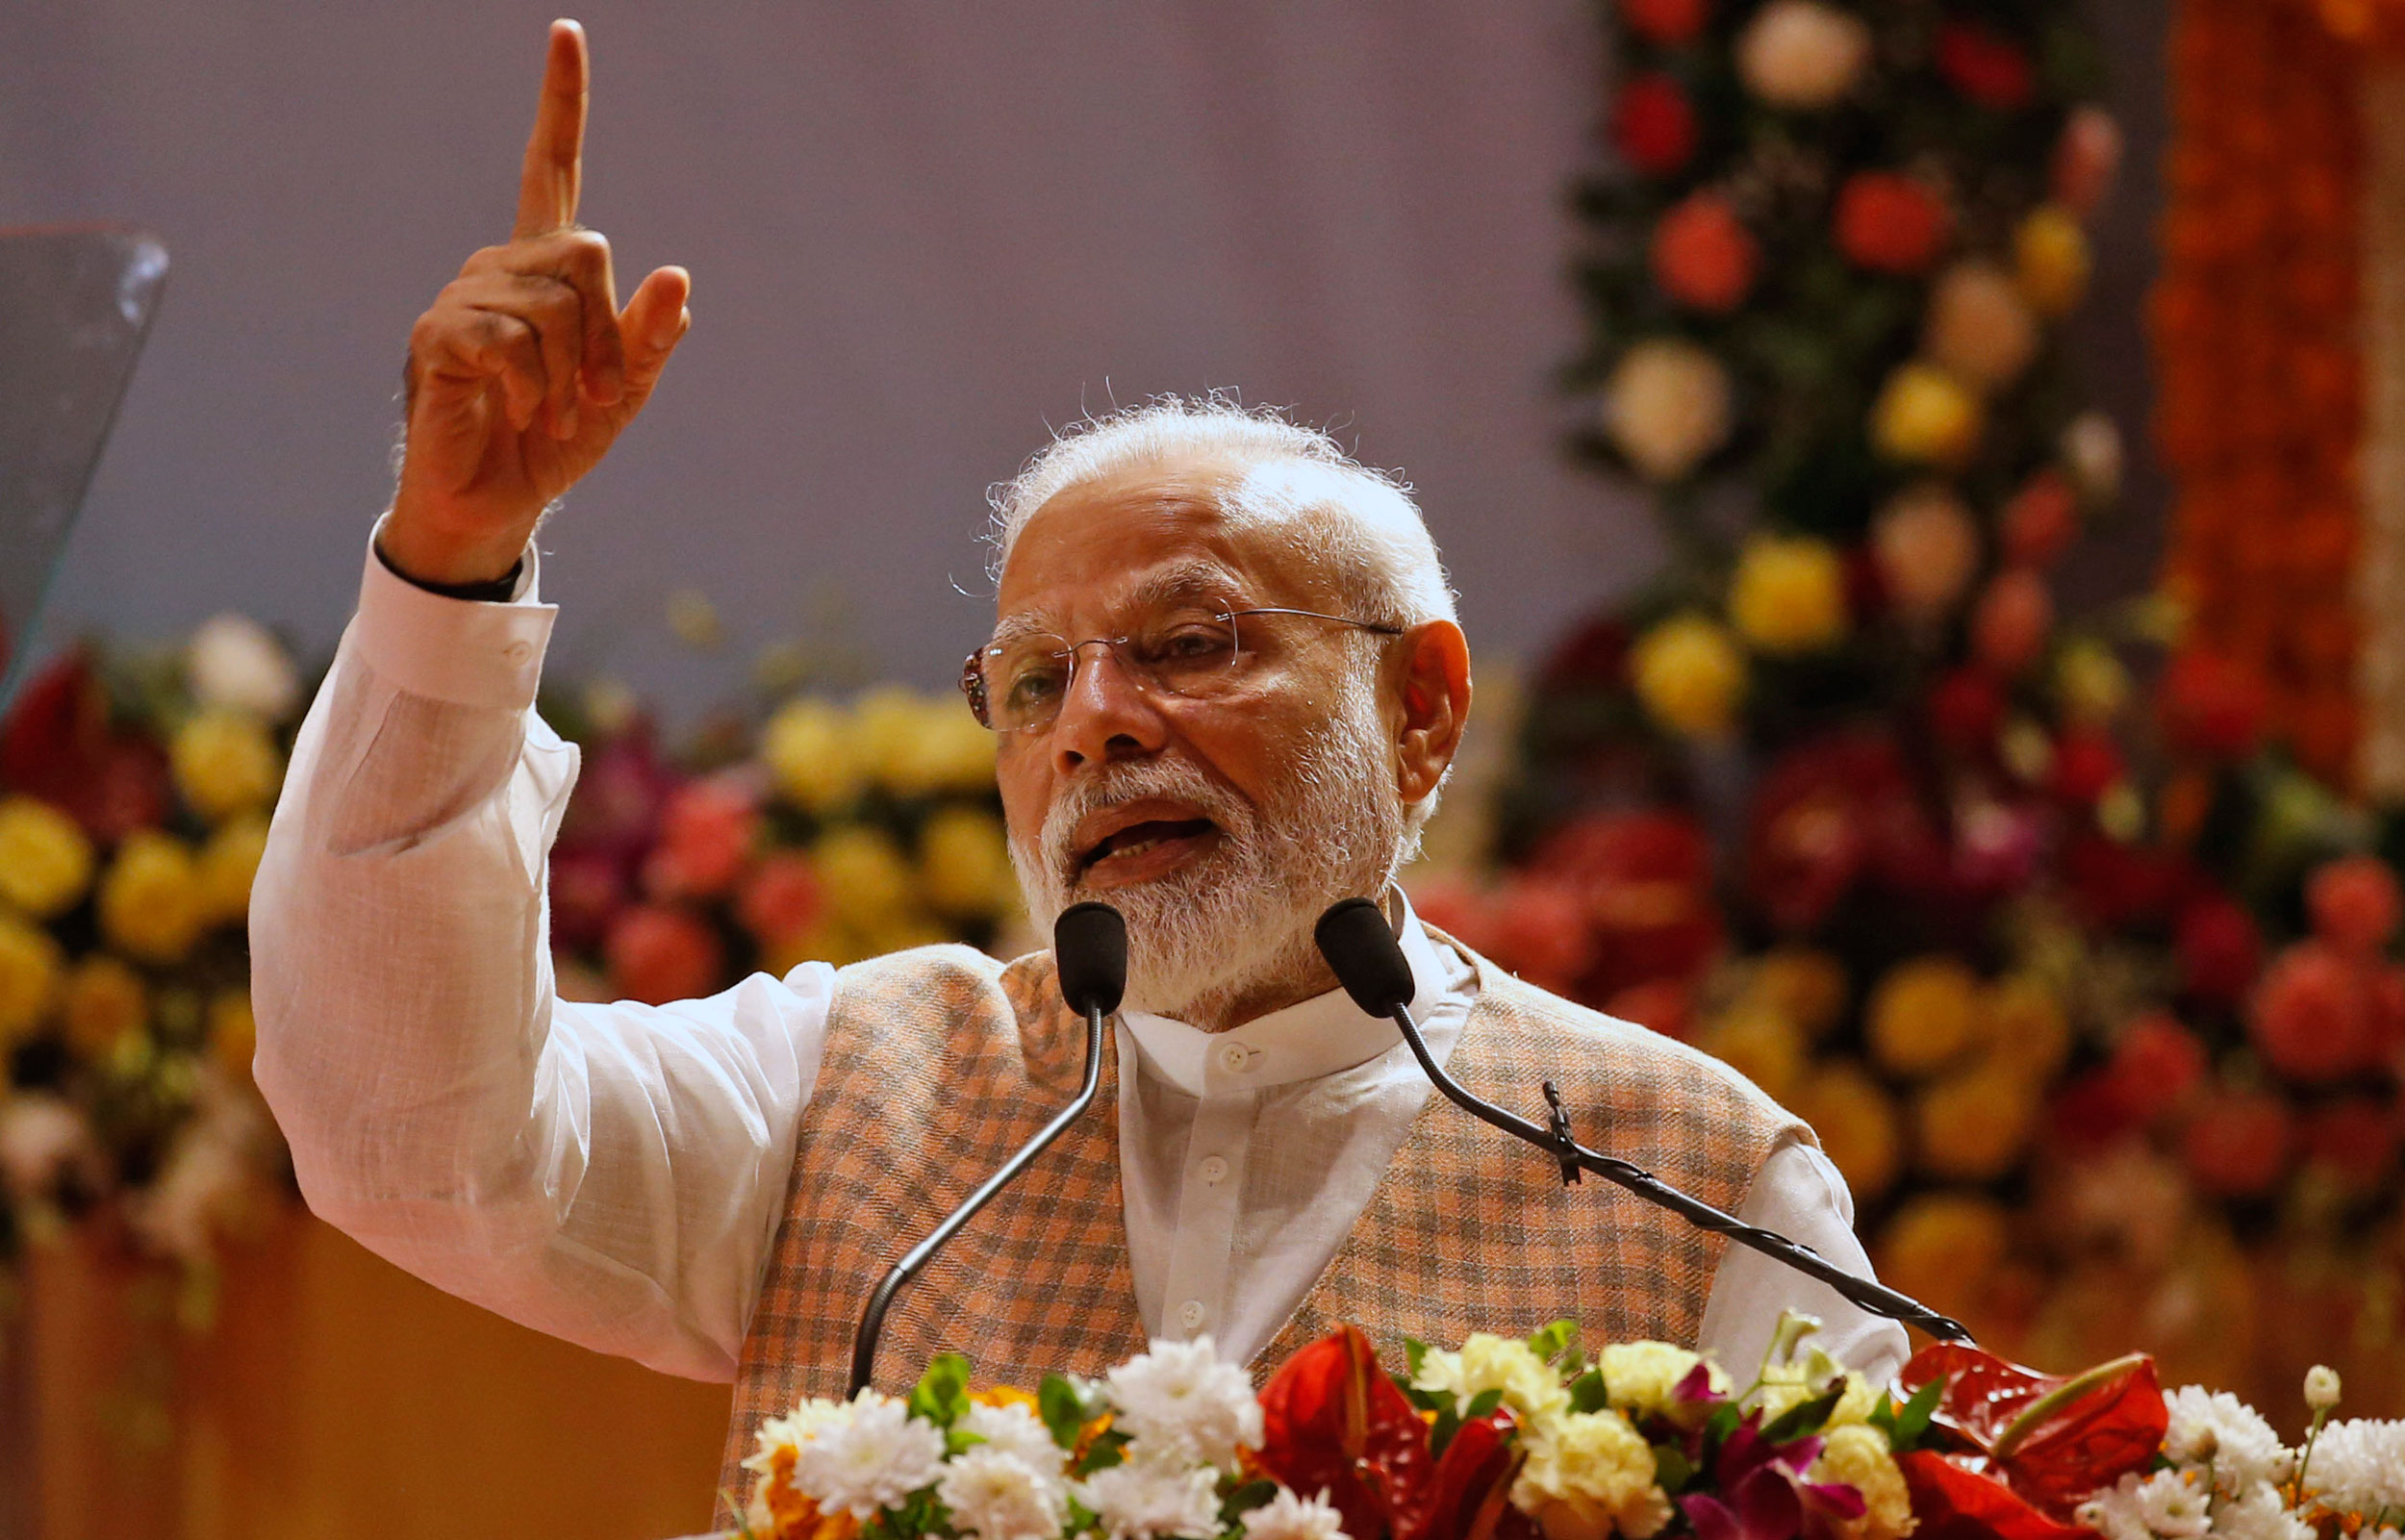 The adulation for Narendra Modi, arguably, matches the collective enthusiasm for India’s first prime minister during his early years in power. The popular will in favour of Modi and the BJP has undoubtedly helped the government deflect attention from the festering areas of concern. 